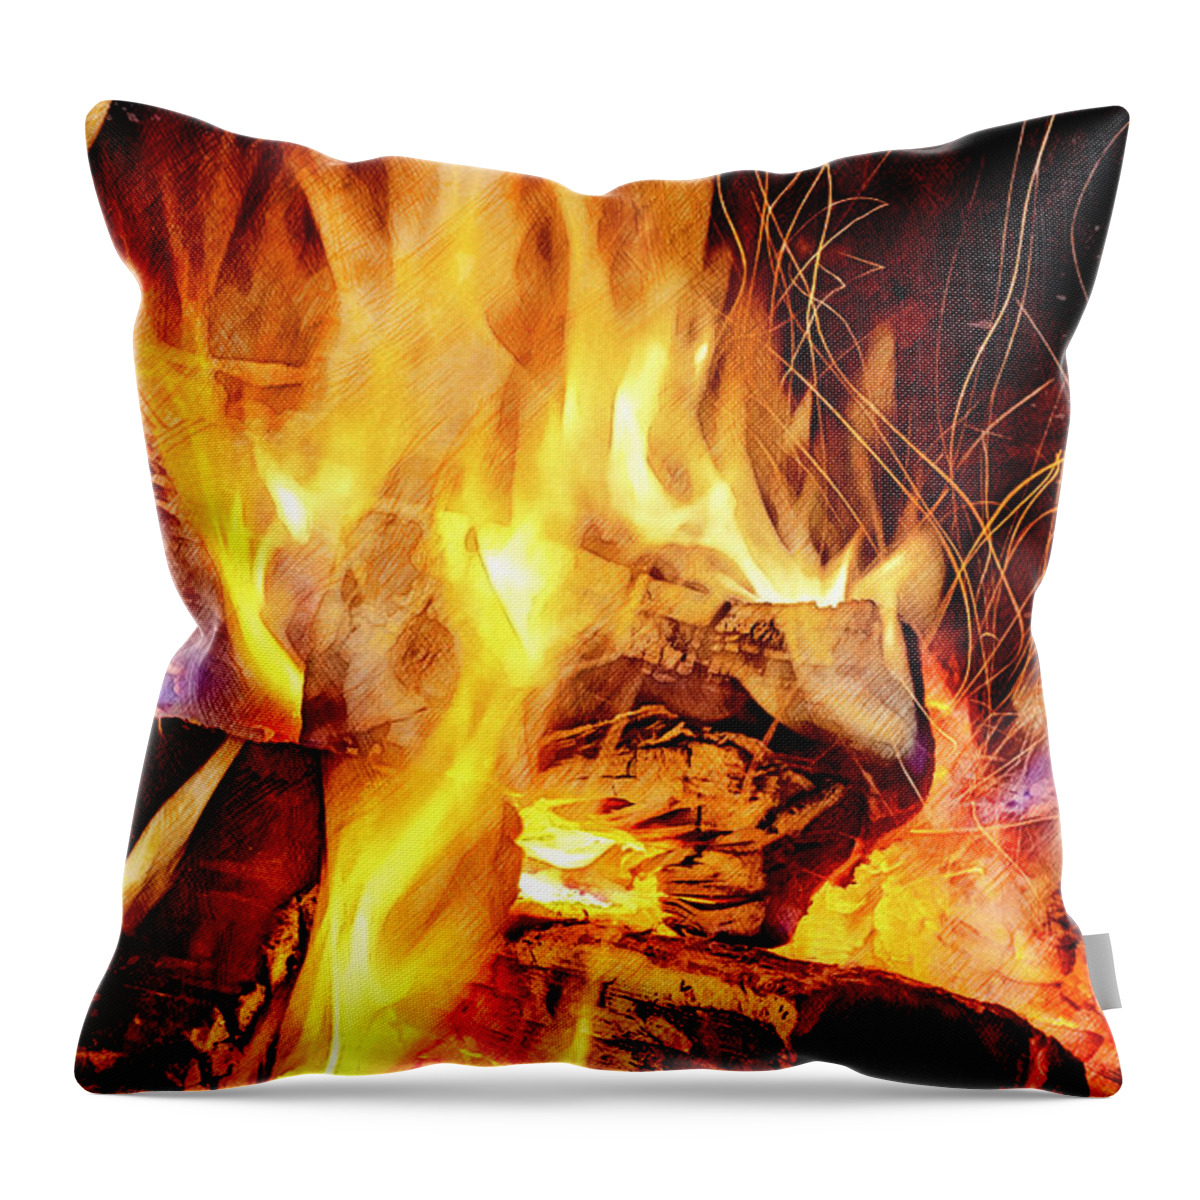 Fire Throw Pillow featuring the photograph Fire by David Smith